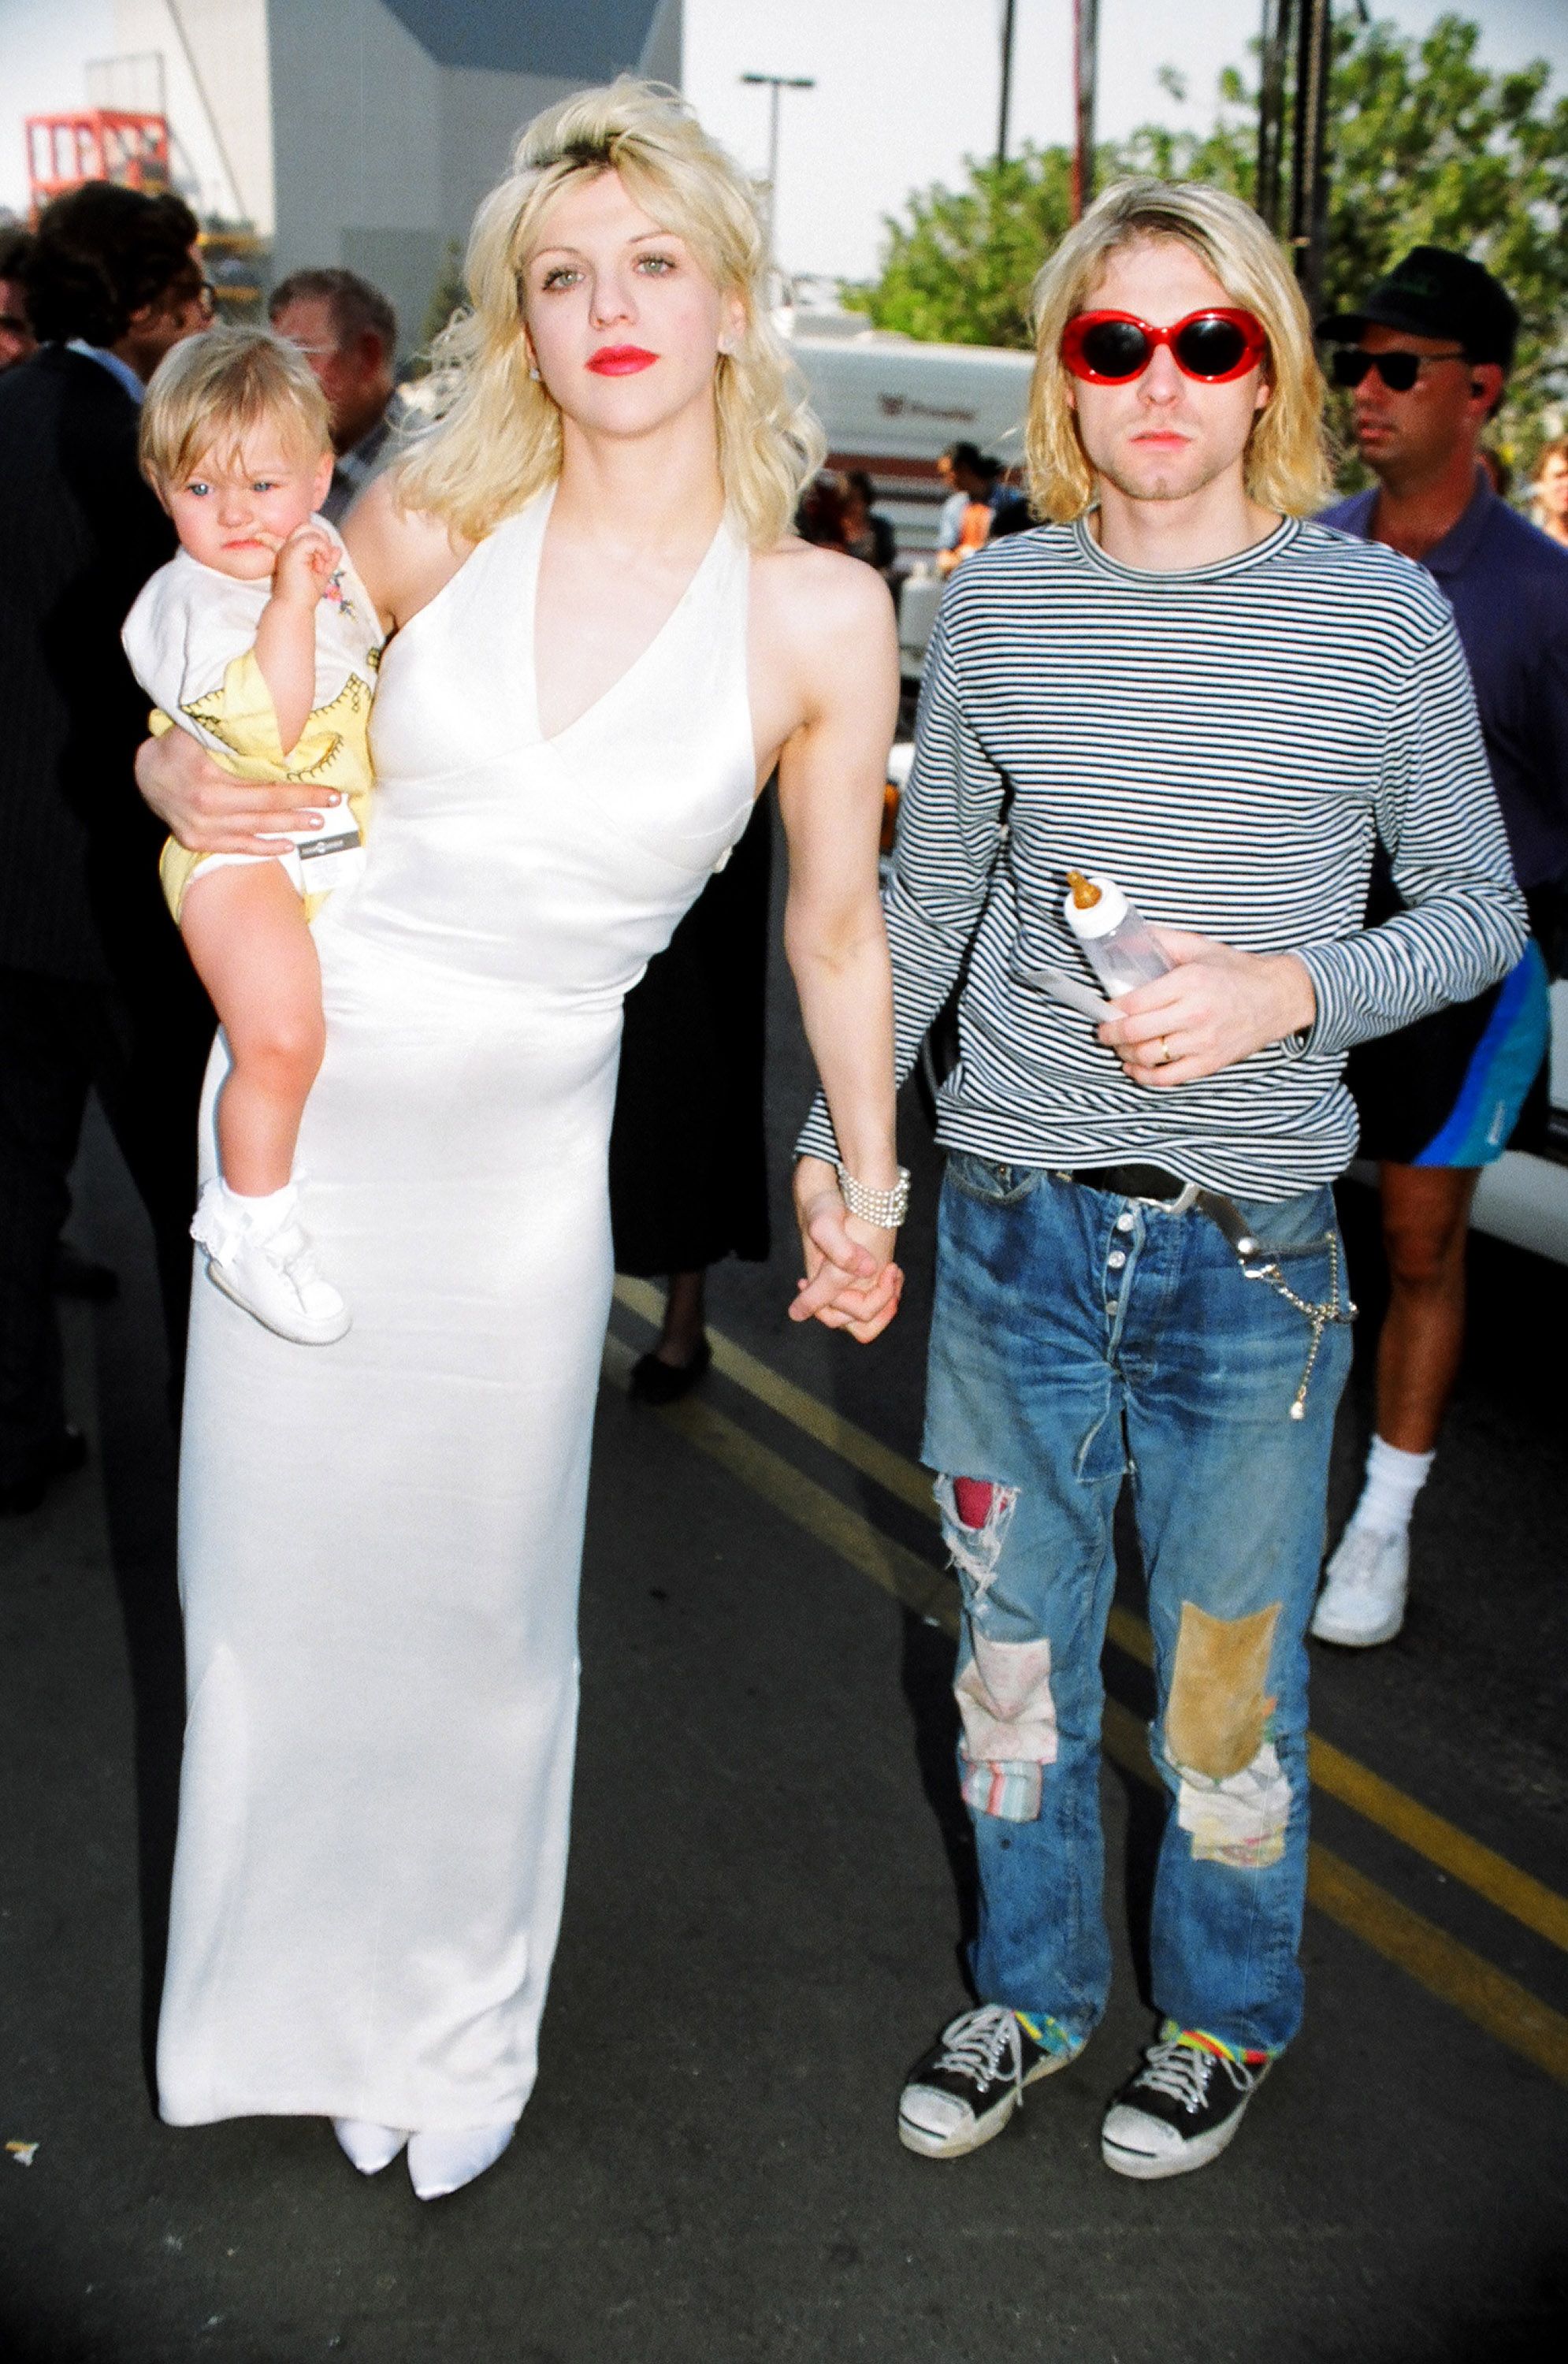 Courtney Love, Frances Bean Cobain, Kurt Cobain of Nirvana at the 10th Annual MTV Video Music Awards. | Source: Getty Images